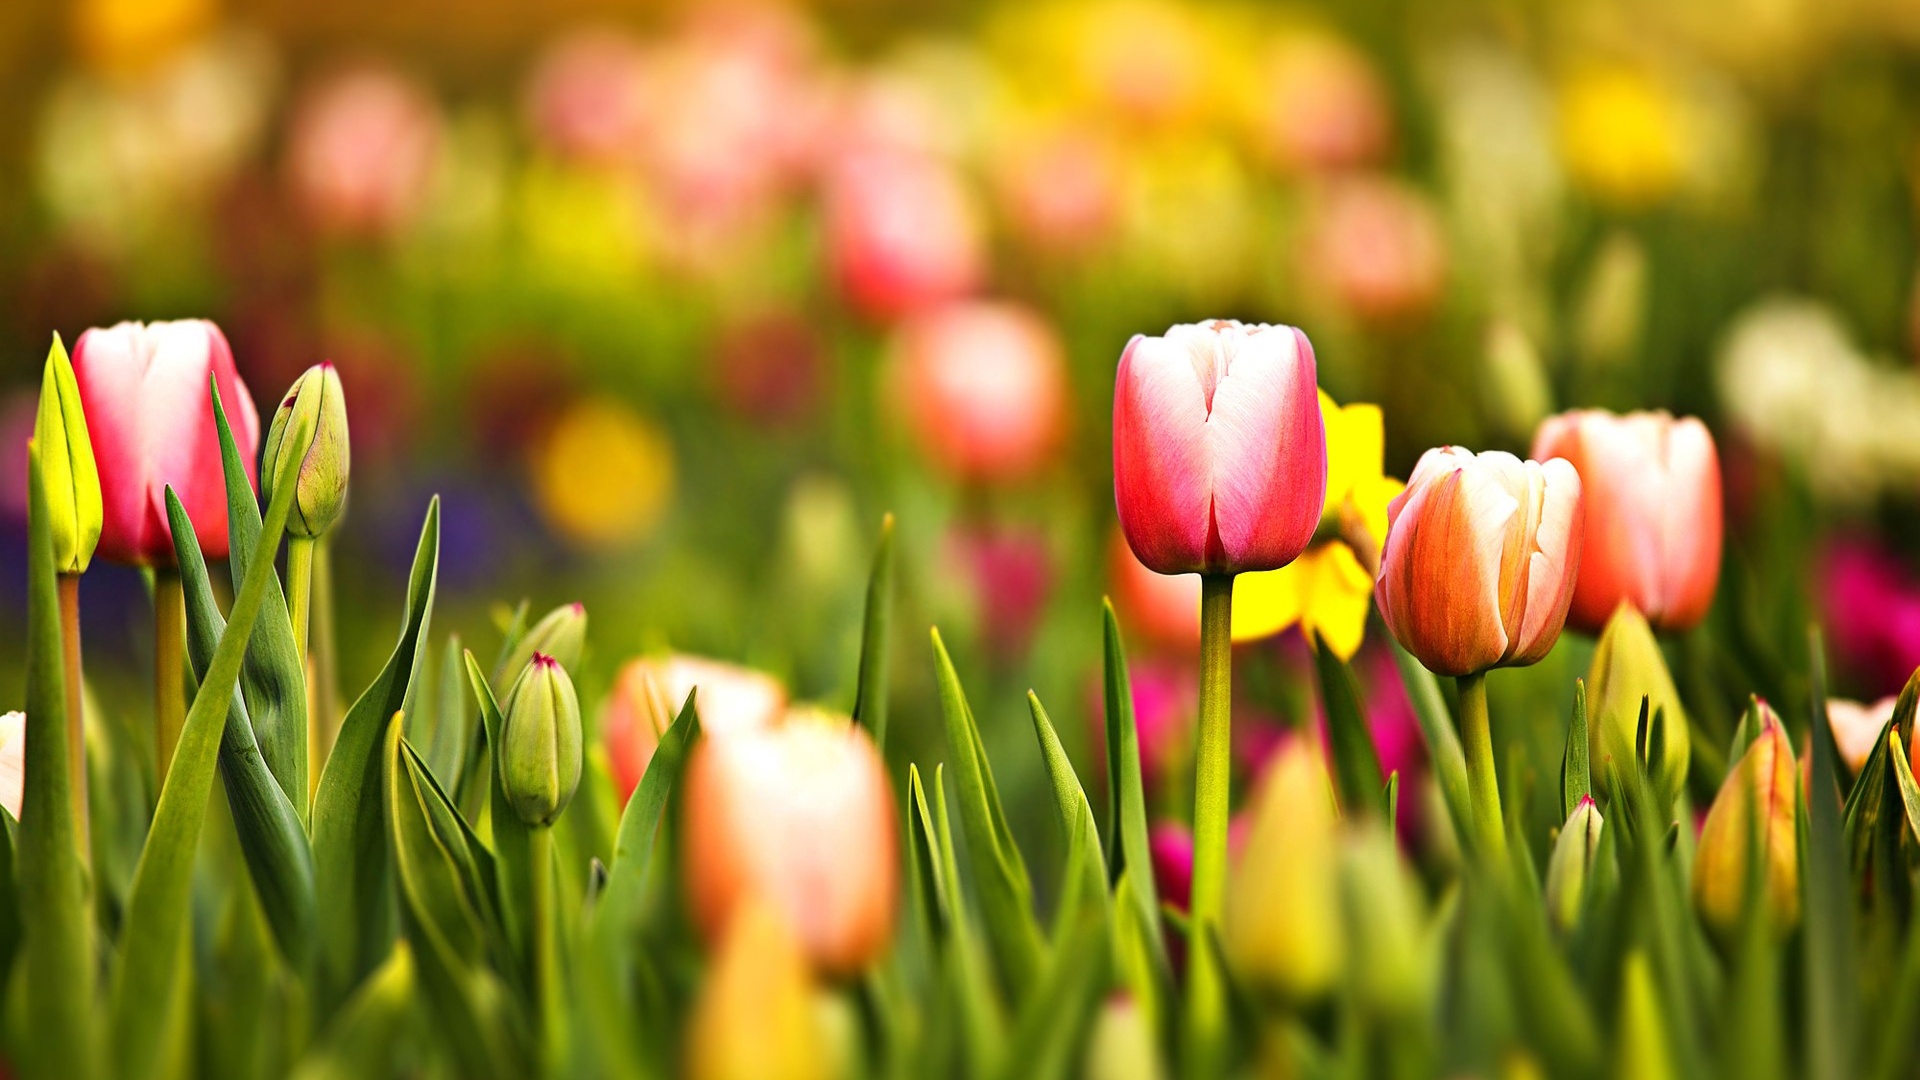 High Quality Tulips Wallpapers Full HD Pictures